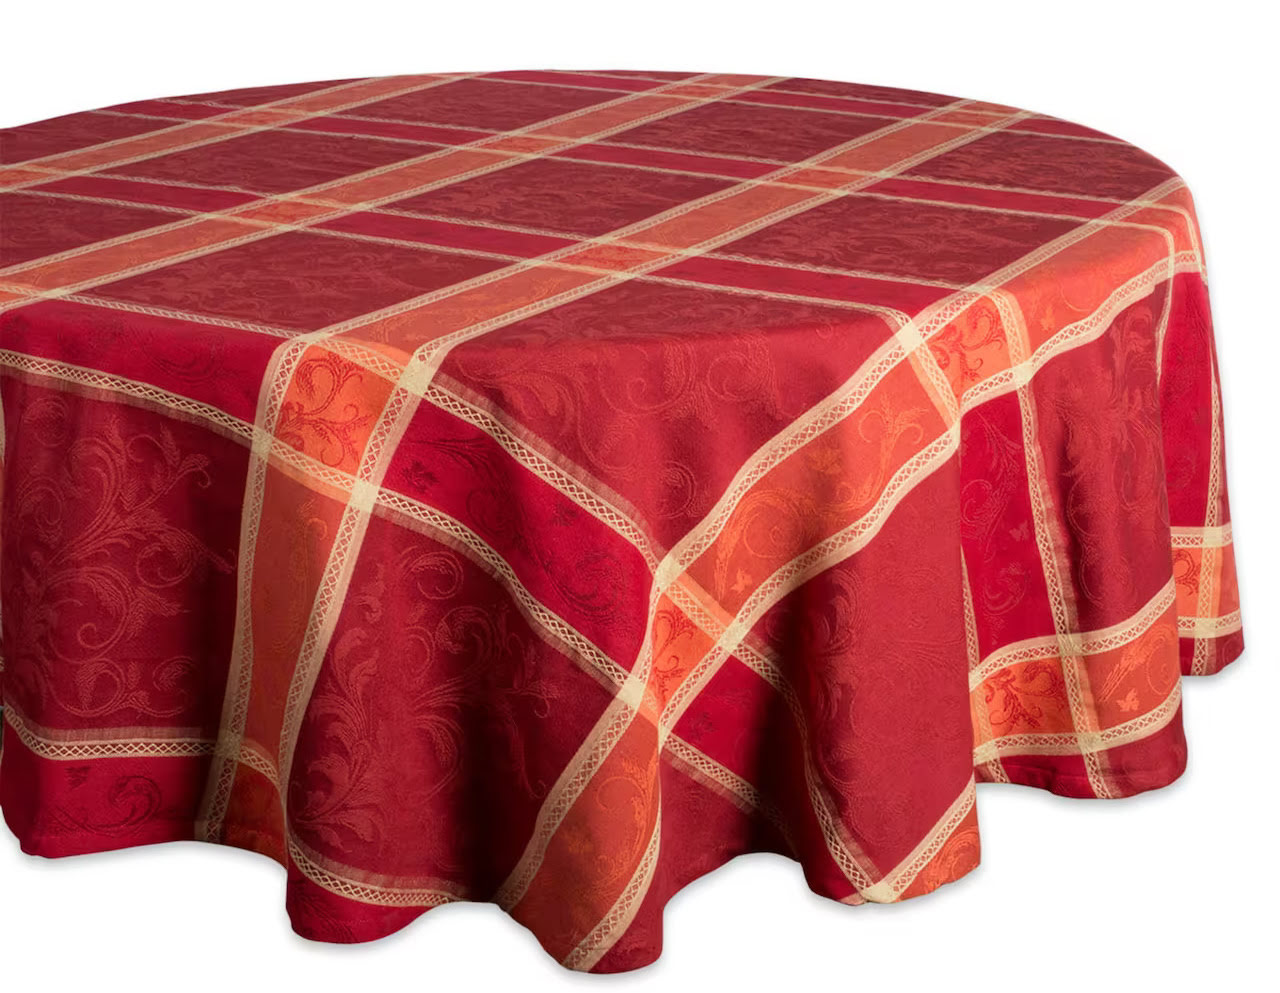 How To Make A Round Tablecloth